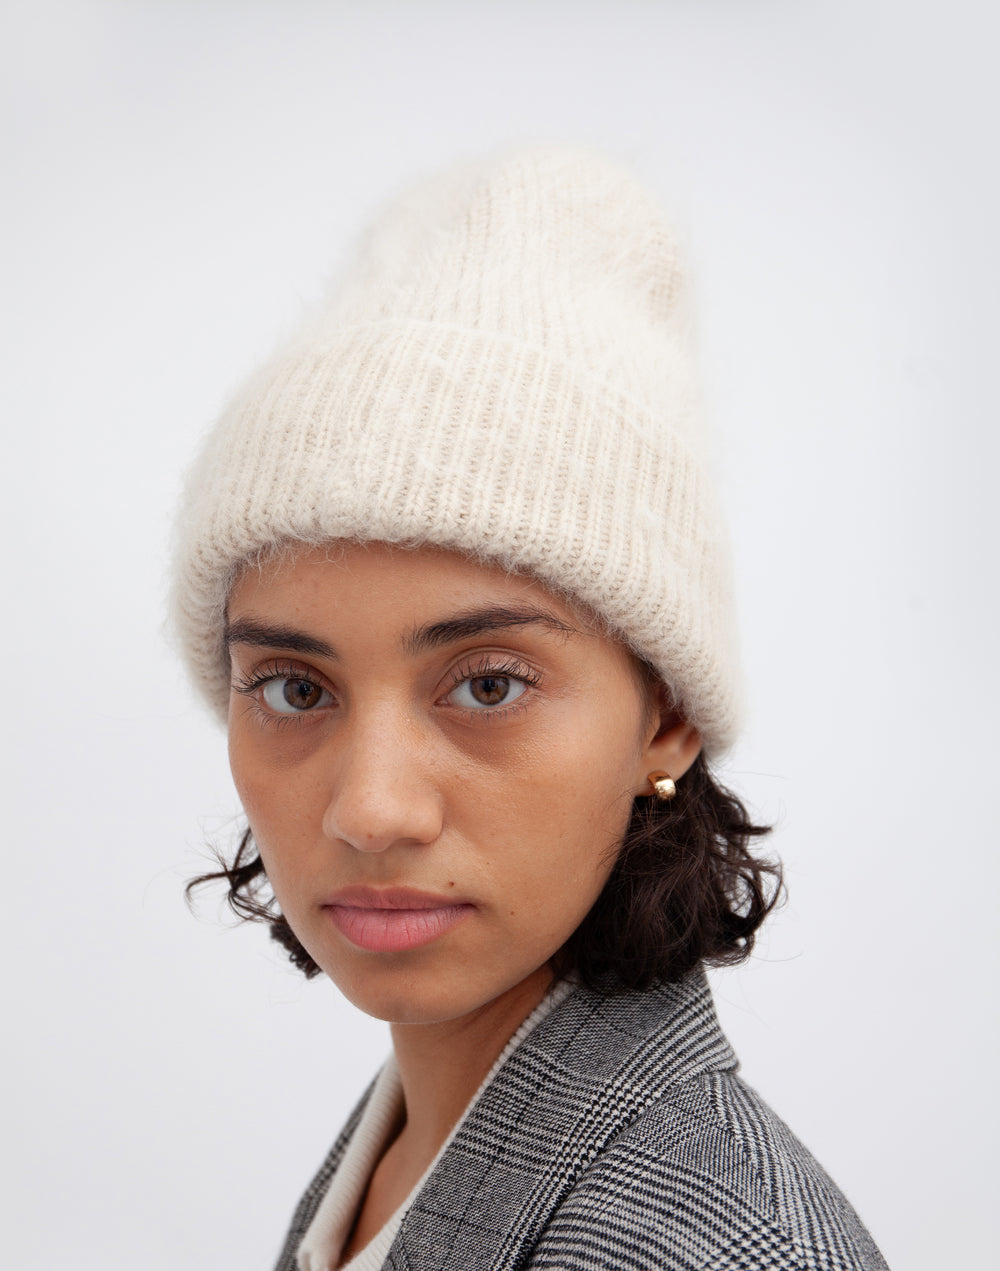 Hyer Goods_A Better Beanie_Angora_cream_offwhite#color_off-white